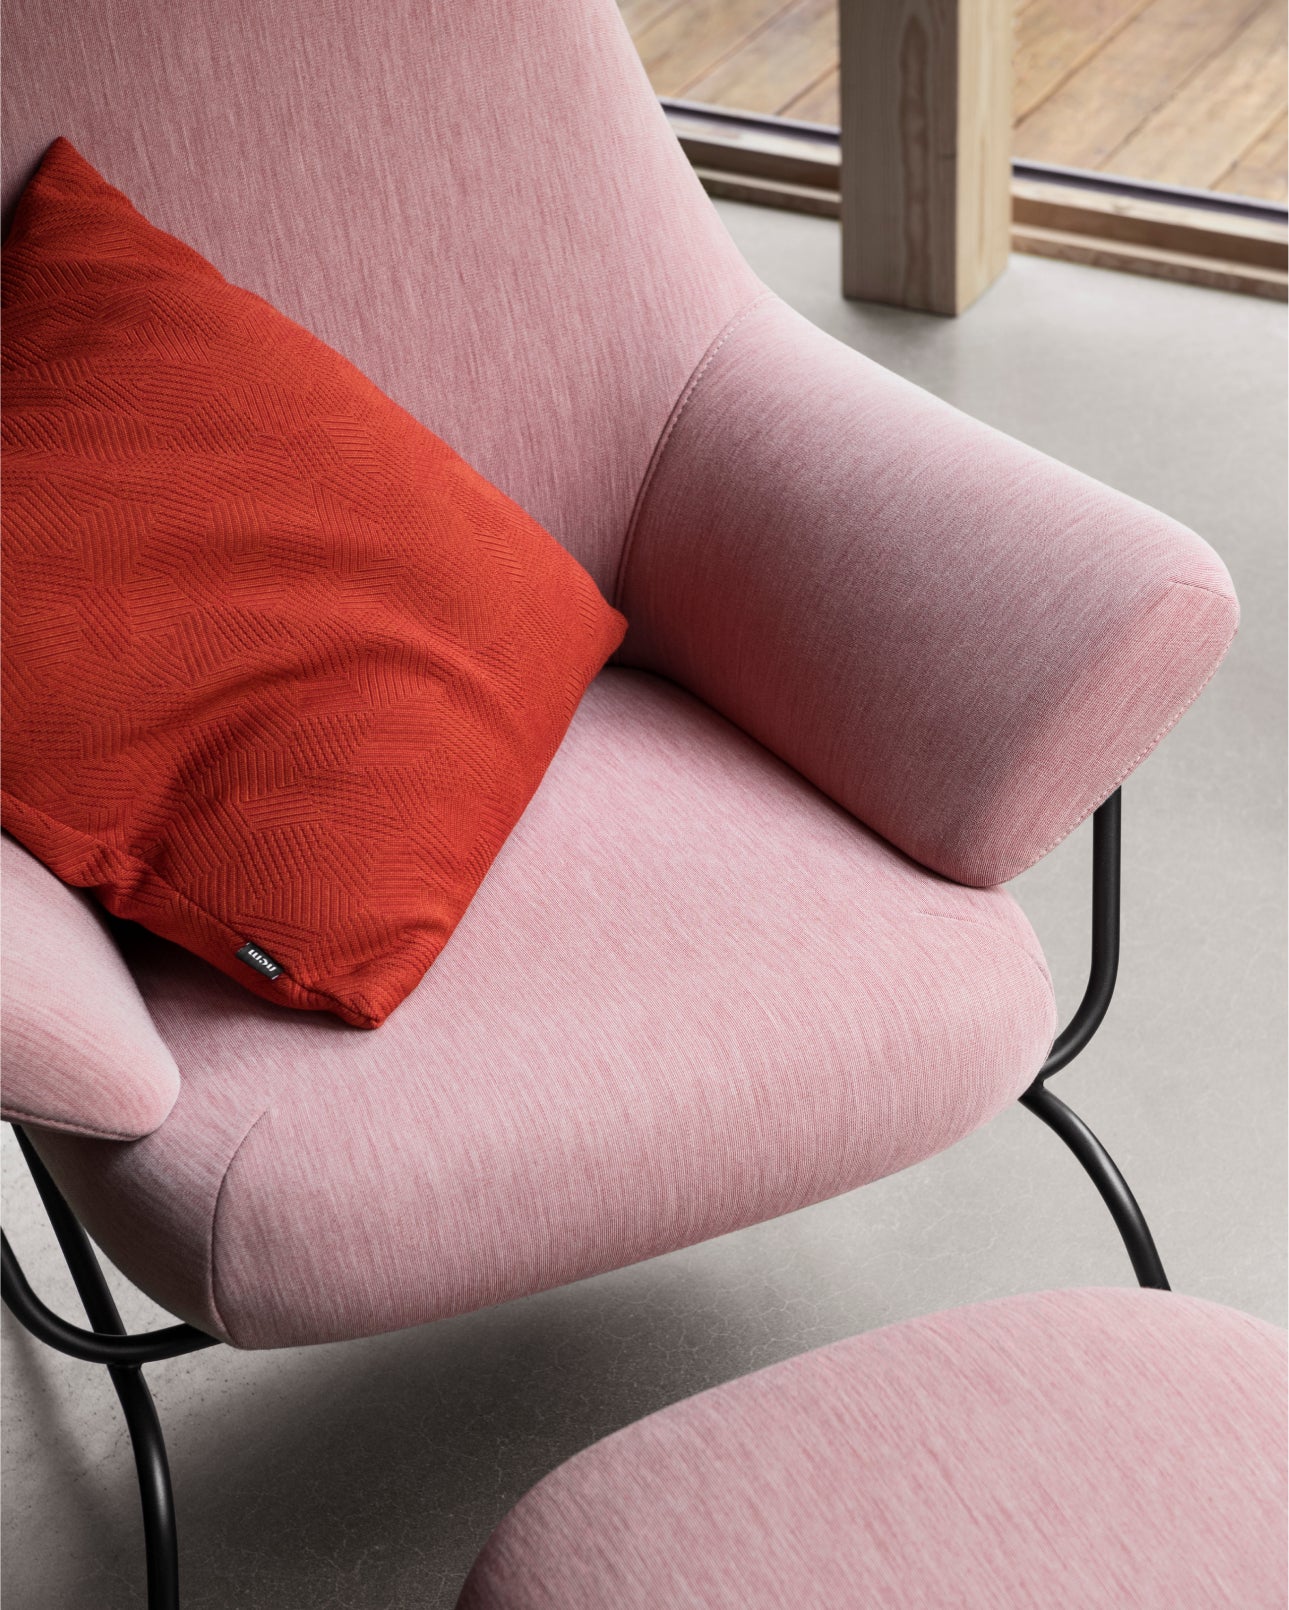 Pink Hai Lounge Chair and Ottoman close-up with Storm Cushion in Flame